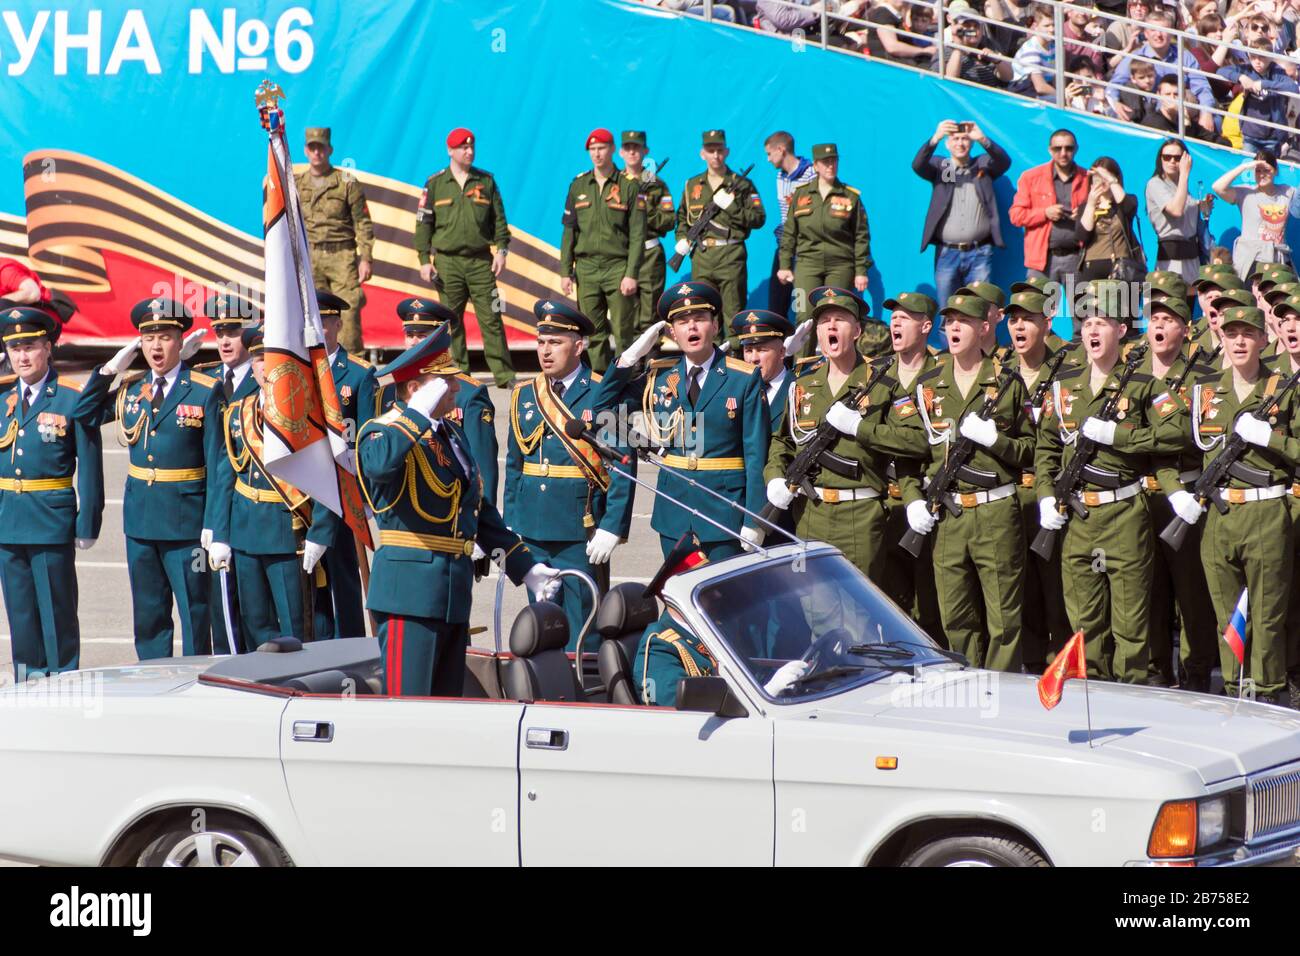 SAMARA, RUSSIA - MAY 9, 2017: Russian ceremony of opening military parade on annual Victory Day, May, 9, 2017 in Samara, Russia Stock Photo